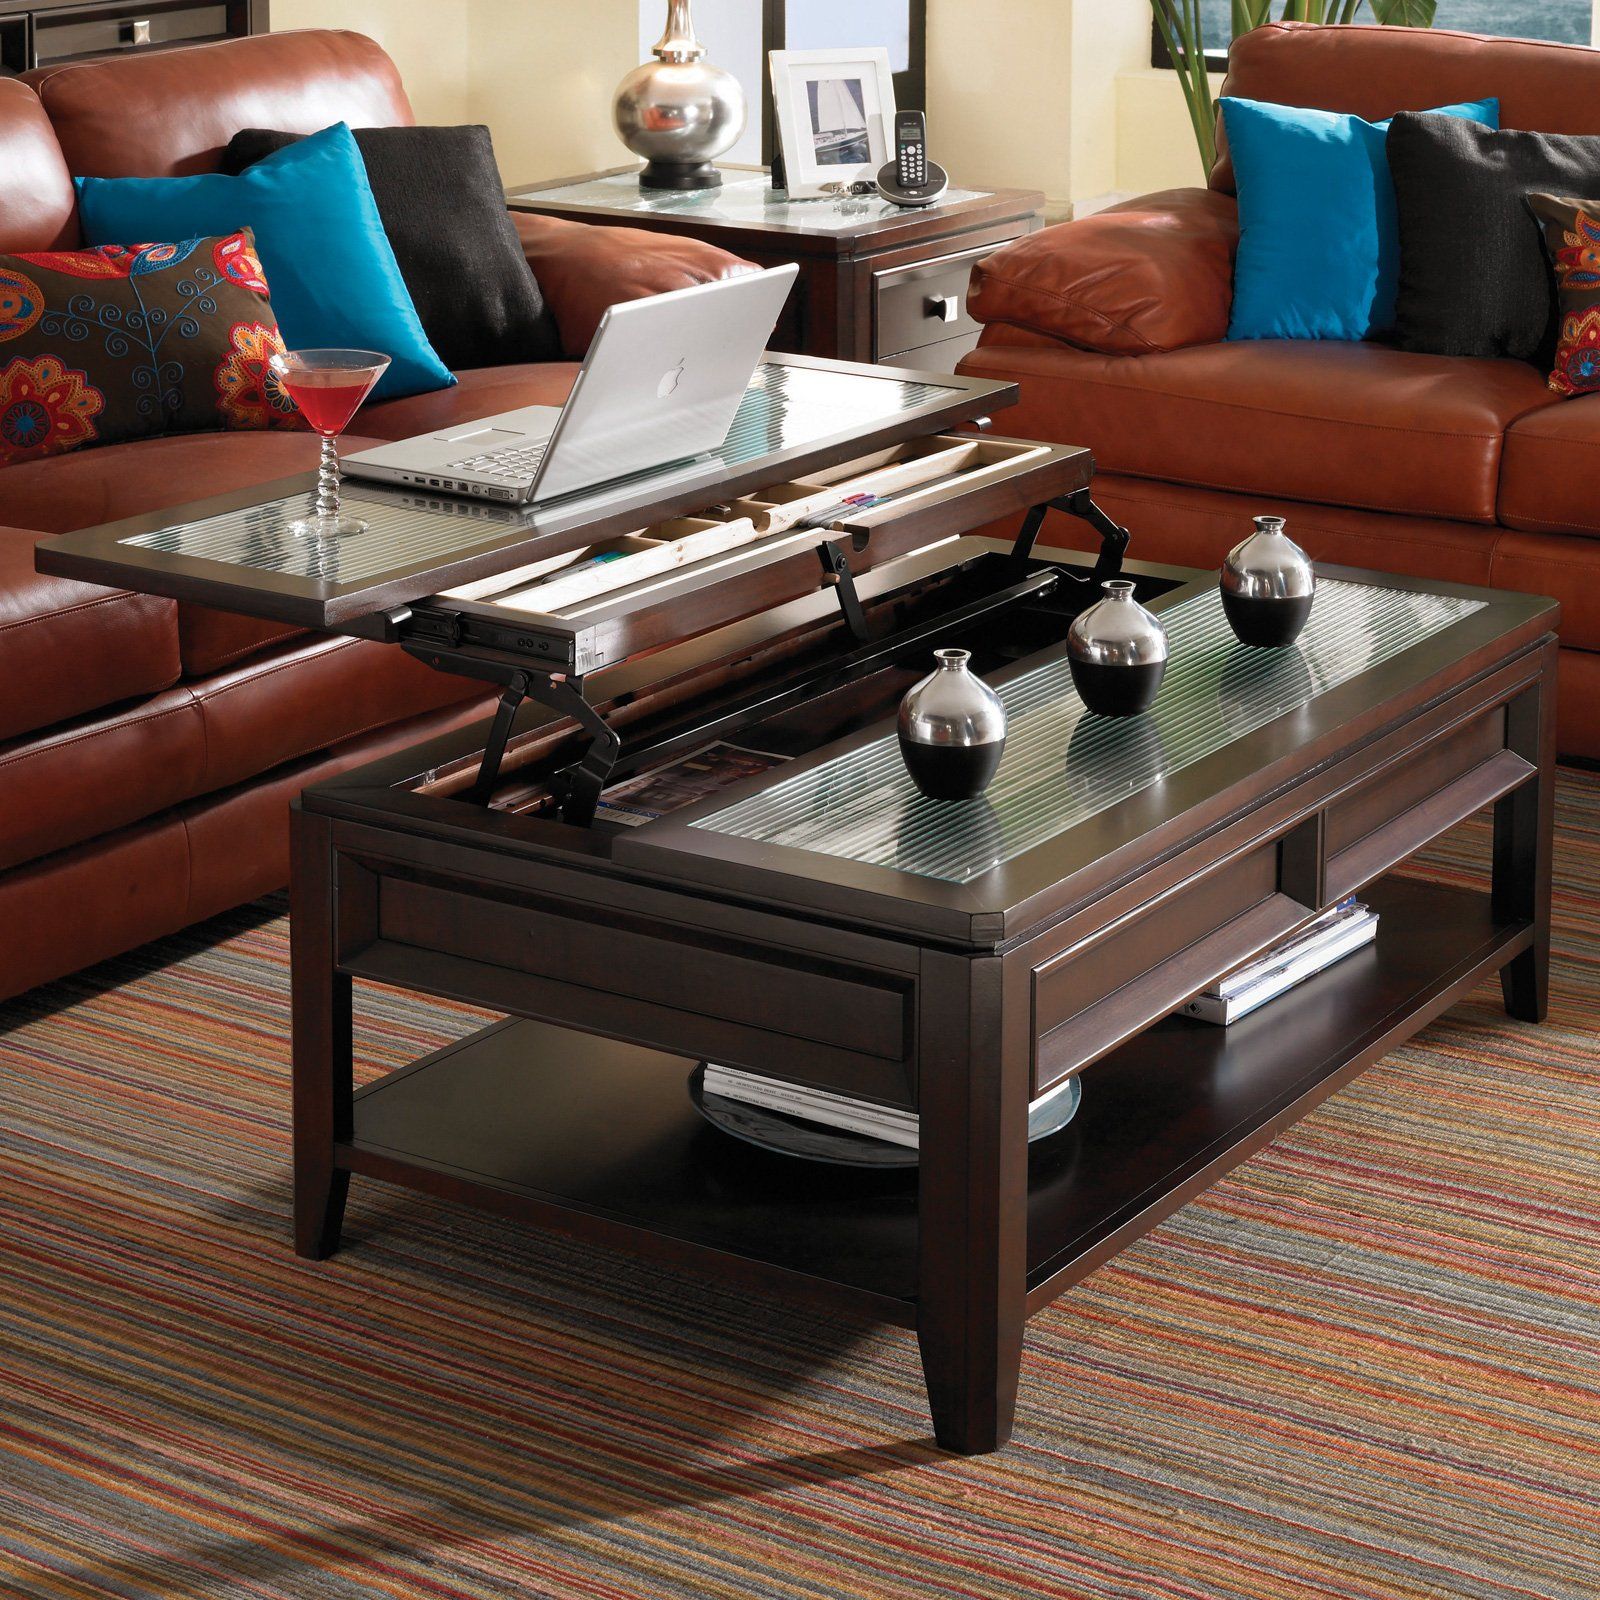 Ashley Furniture Lift Top Coffee Table Ideas In Most Popular High Gloss Lift Top Coffee Tables (View 13 of 15)